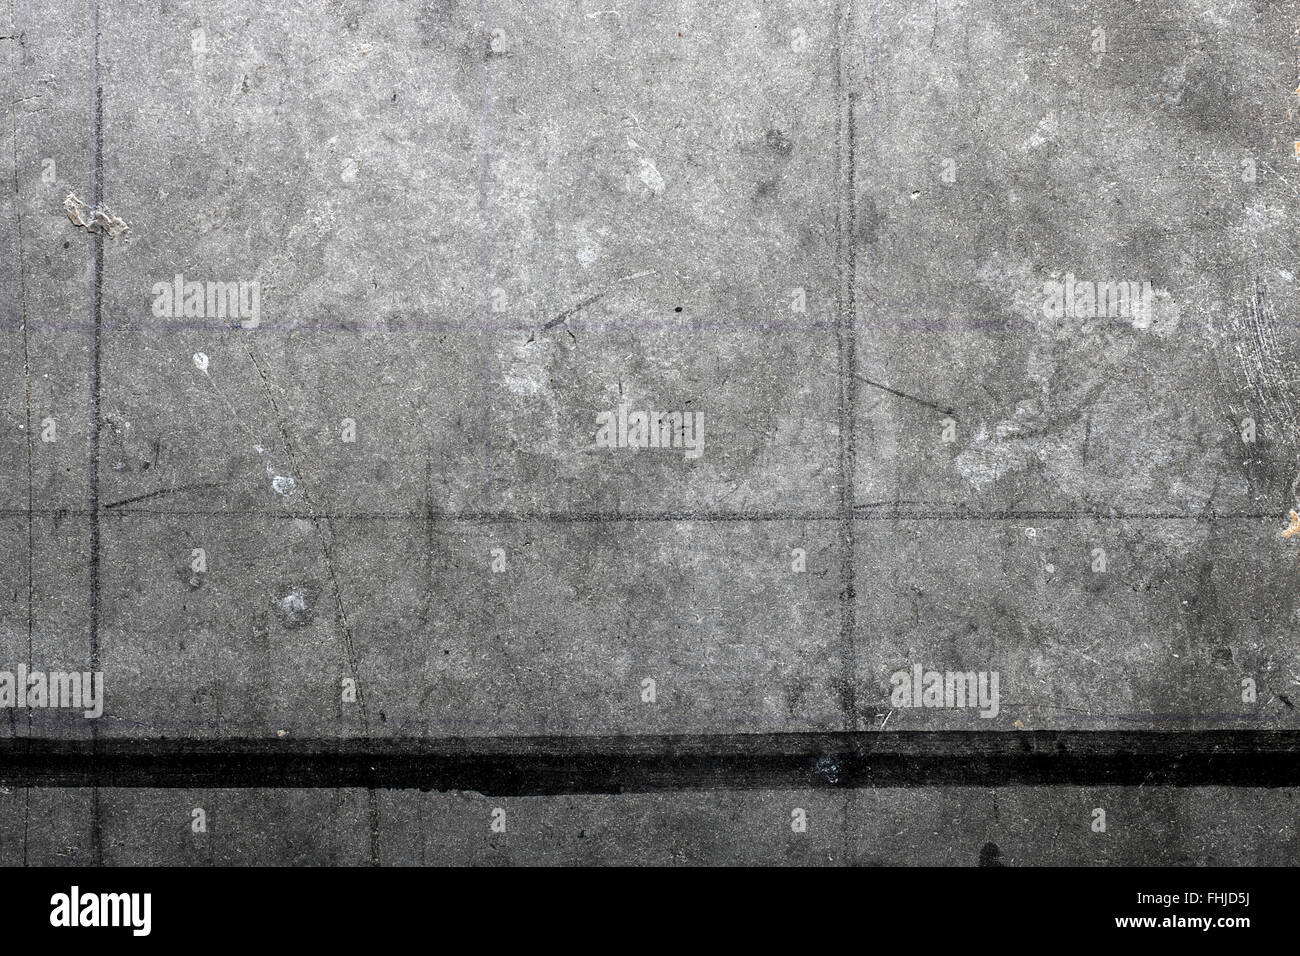 Cement Board High Resolution Stock Photography and Images - Alamy